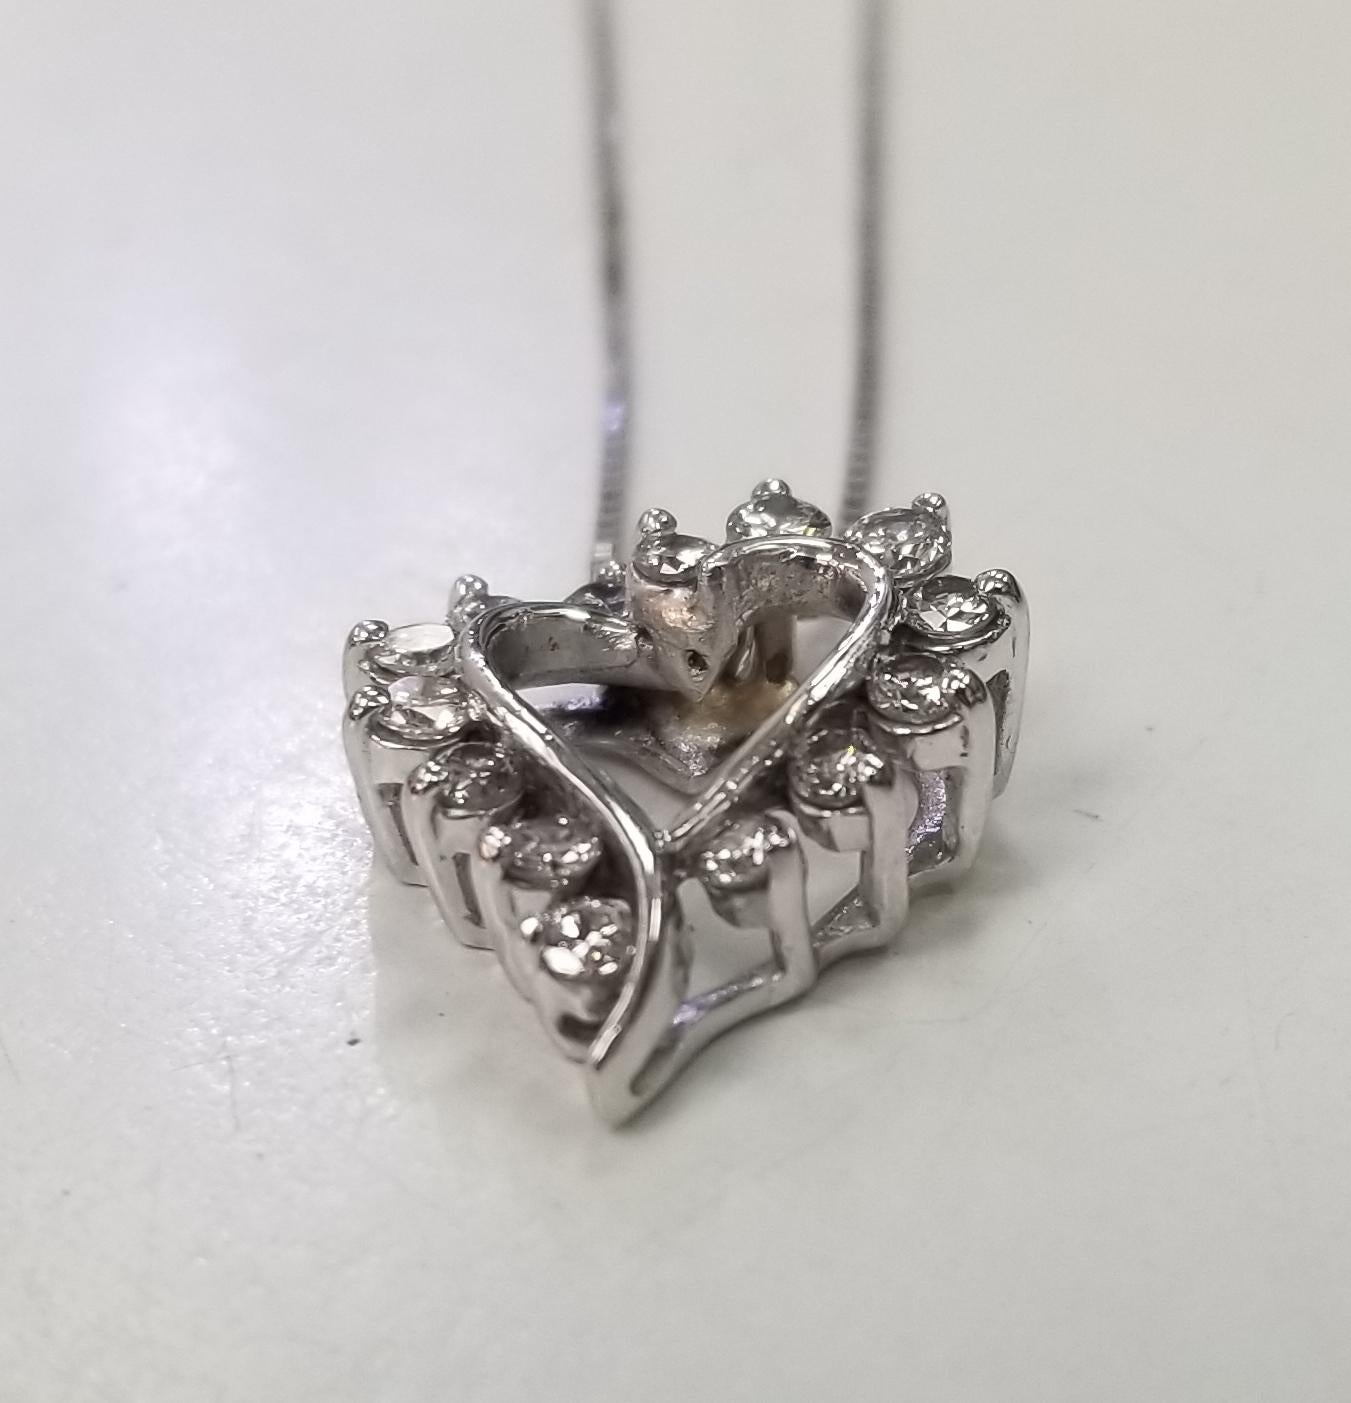 Total Carat Weight: .75pts.
Style:Chain
Base Metal:Gold
Diamond Clarity Grade:Slightly Included (VSI2-SI1)
Setting Style:Prong and Channel
Number of Gemstones:14
Type:Necklace
Cut Grade:Very Good
Main Stone Color:NEAR COLORLESS
Item Length:16